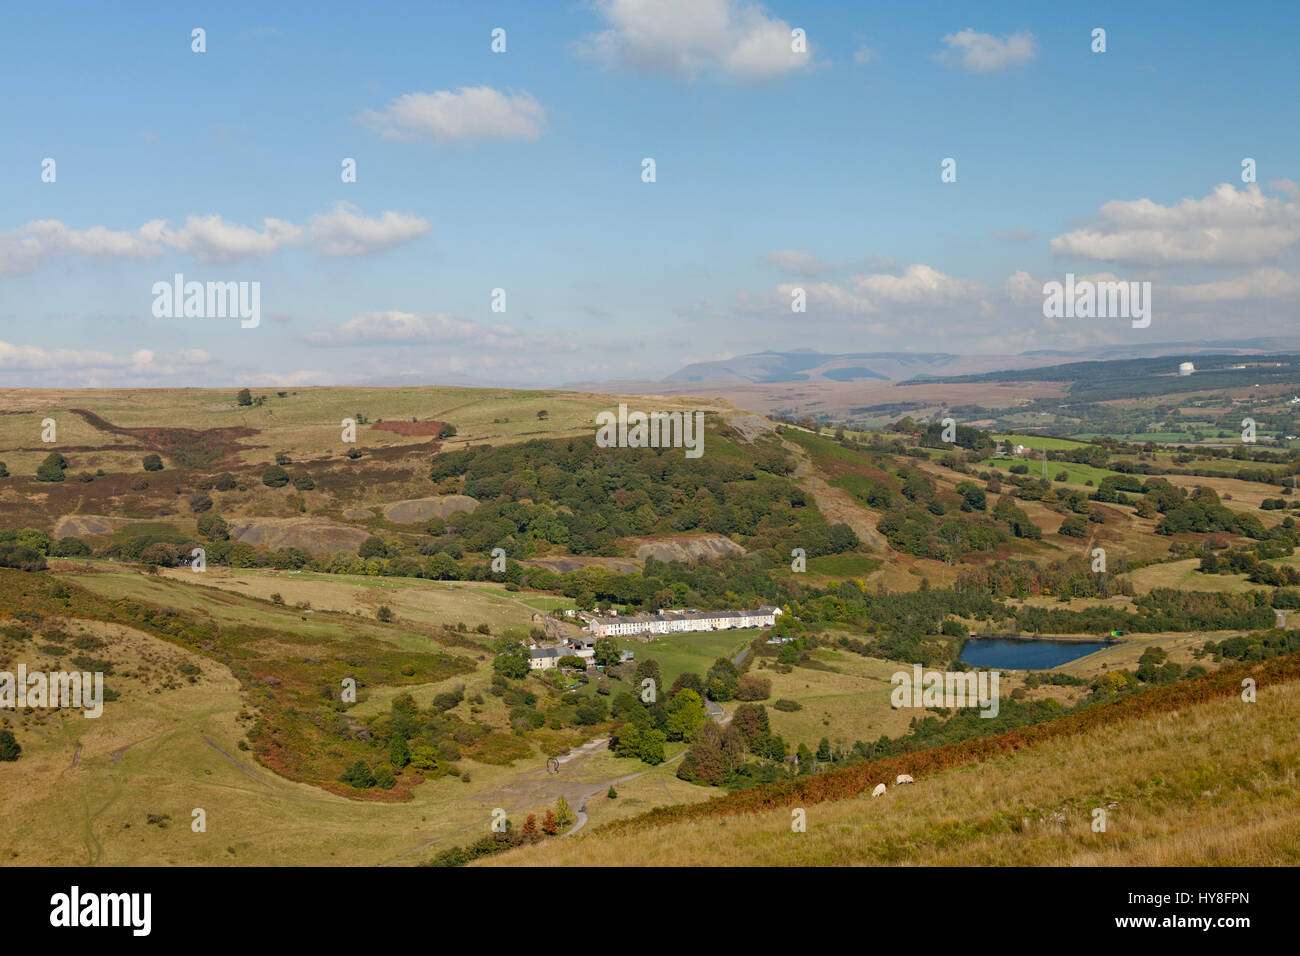 View of Dare Valley Country Park and higher lake, Aberdare, Rhondda Cynon Taf, South Wales, UK Stock Photo